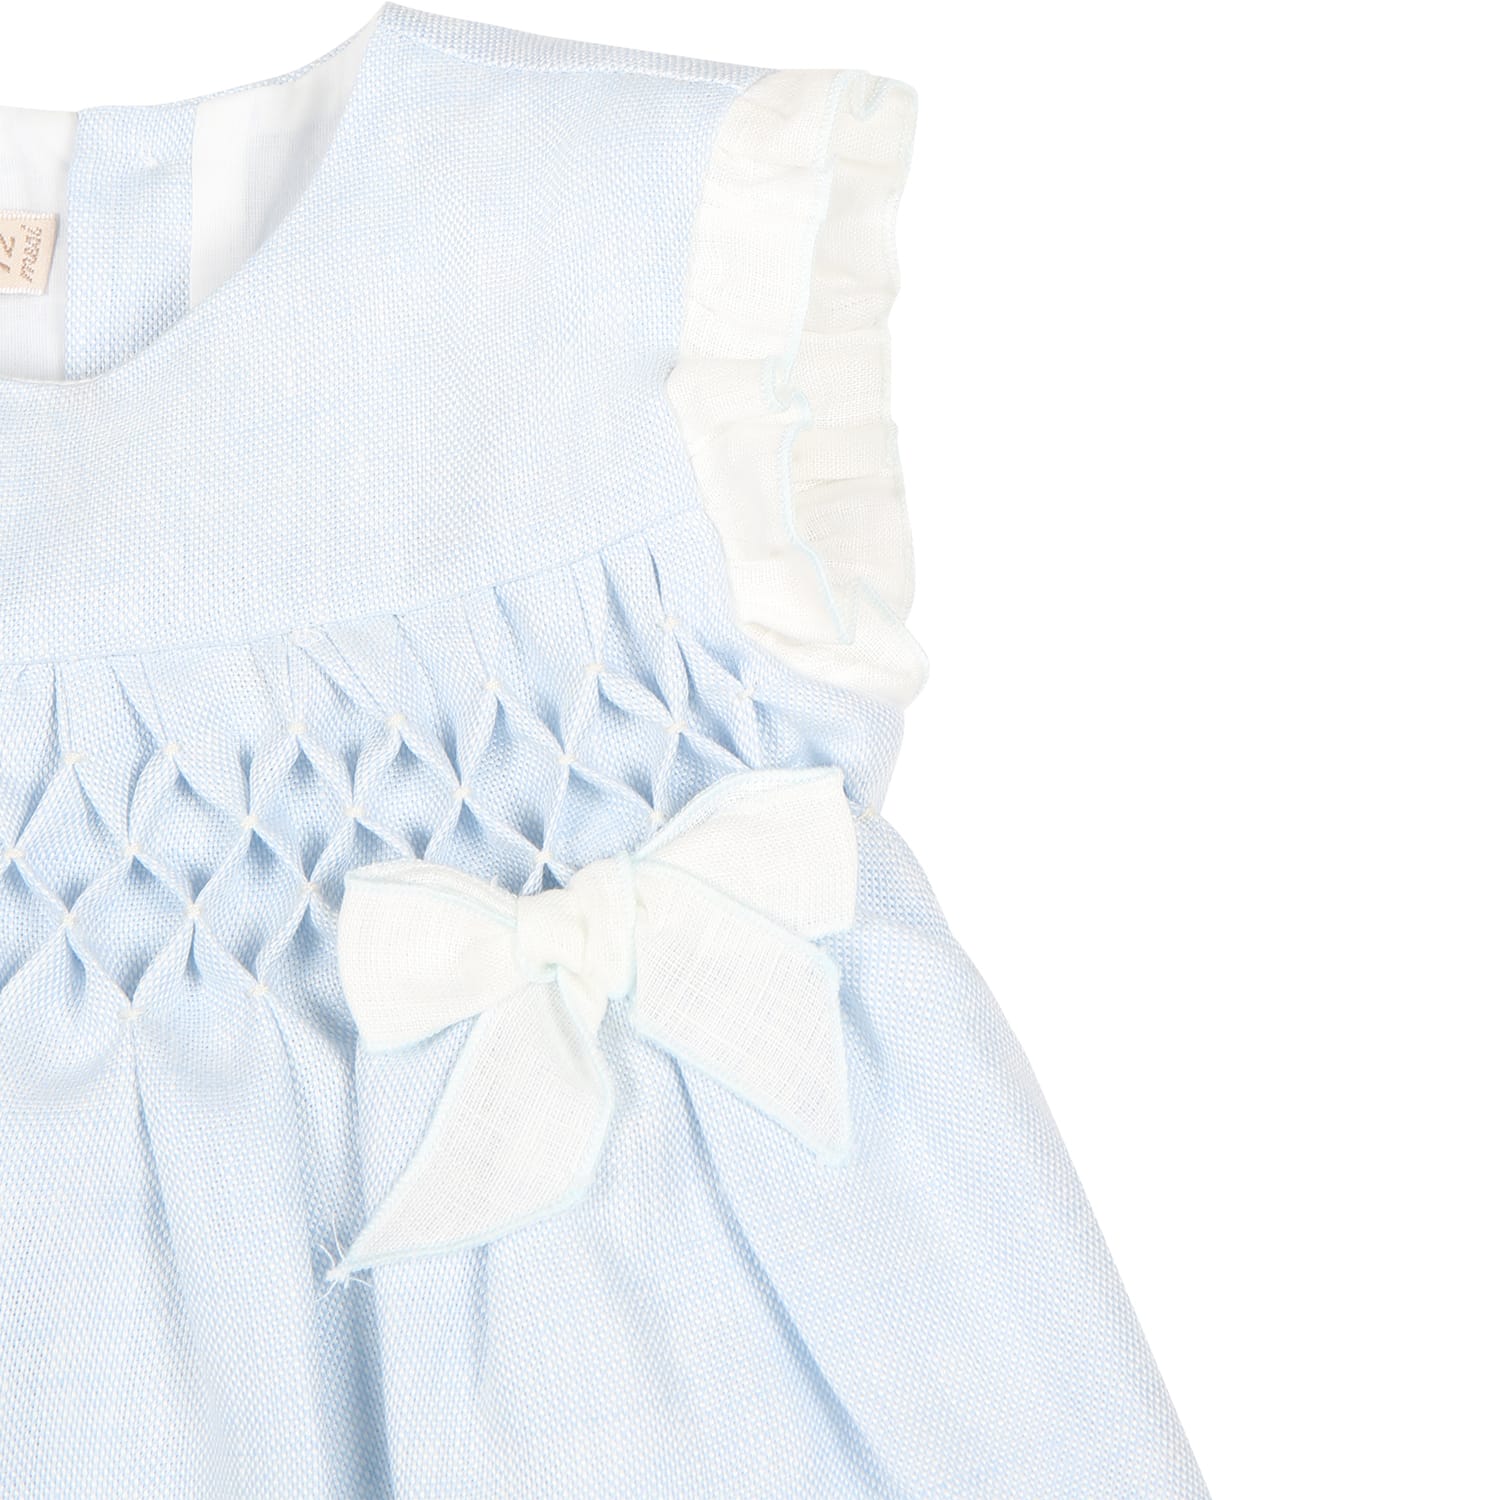 Shop La Stupenderia Light Blue Dress For Baby Girl With Bows